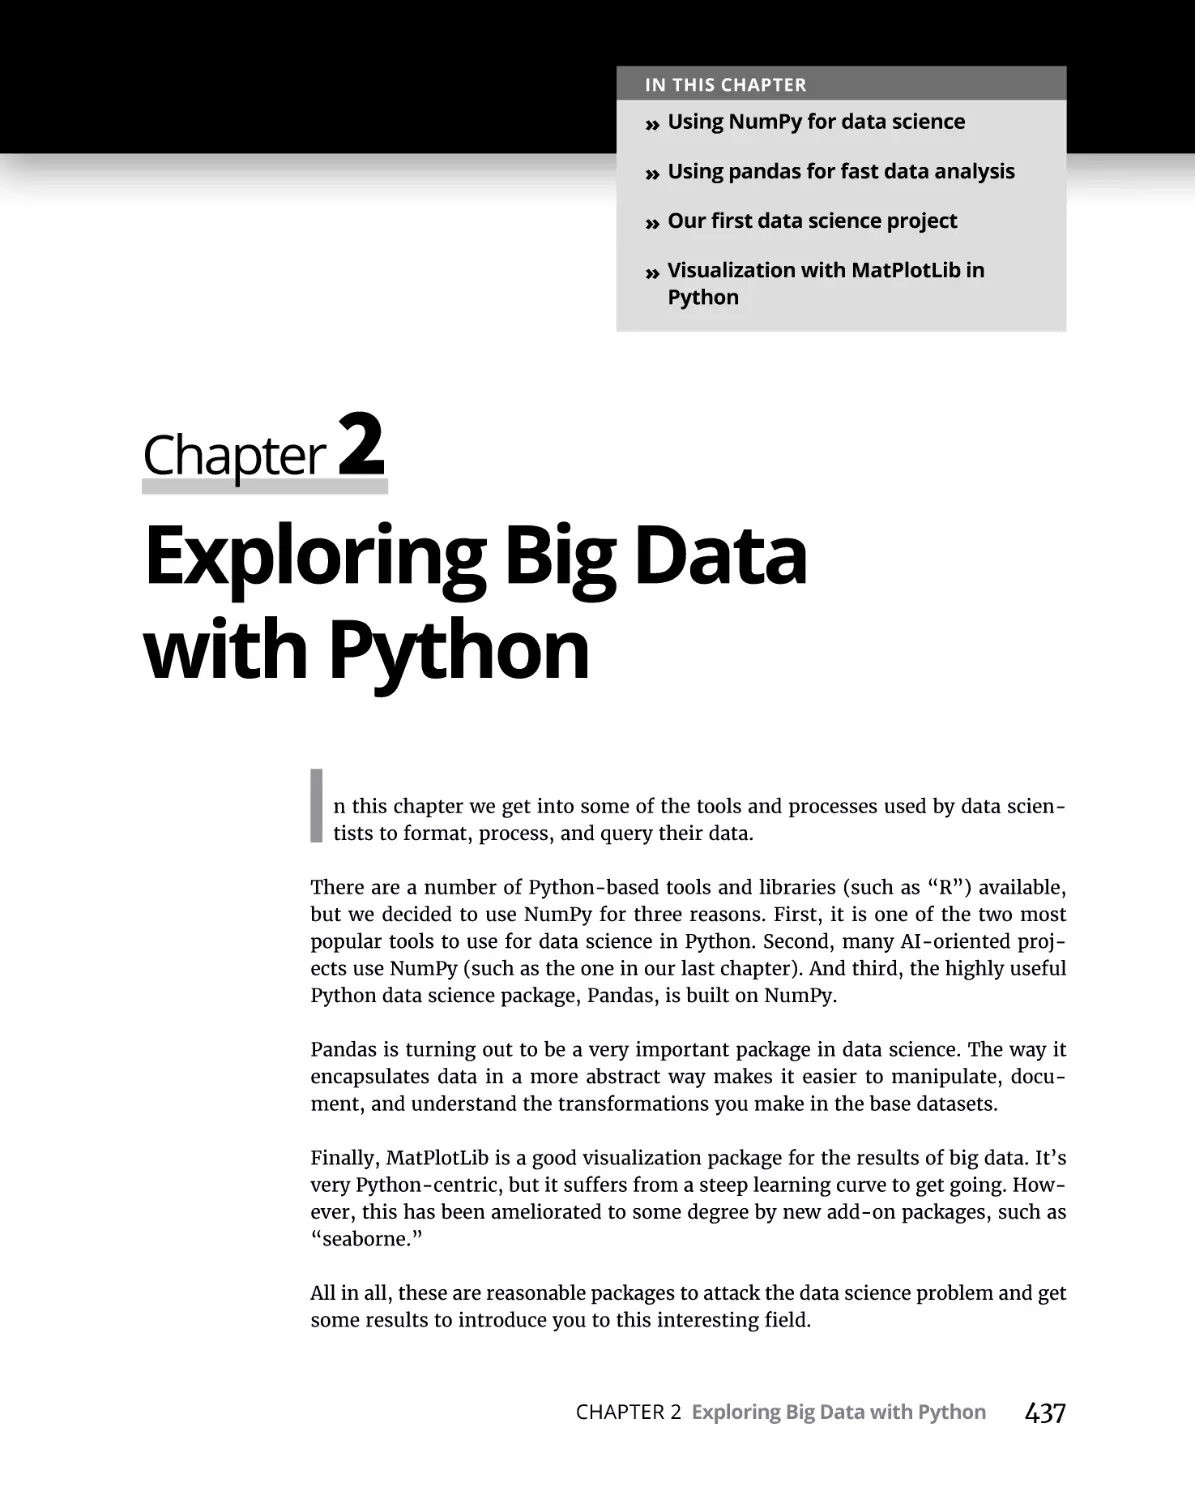 Chapter 2 Exploring Big Data with Python